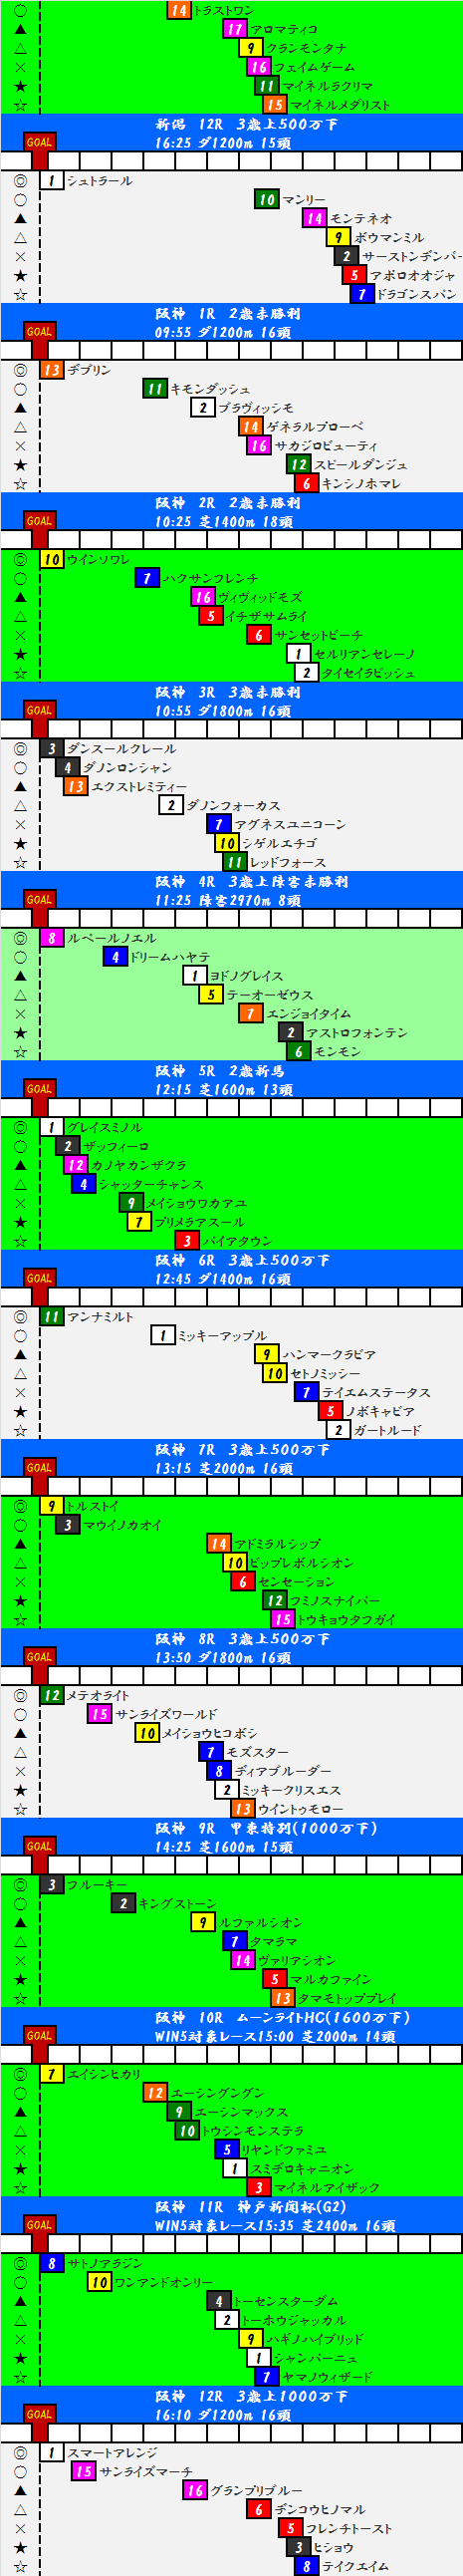 2014092802.png